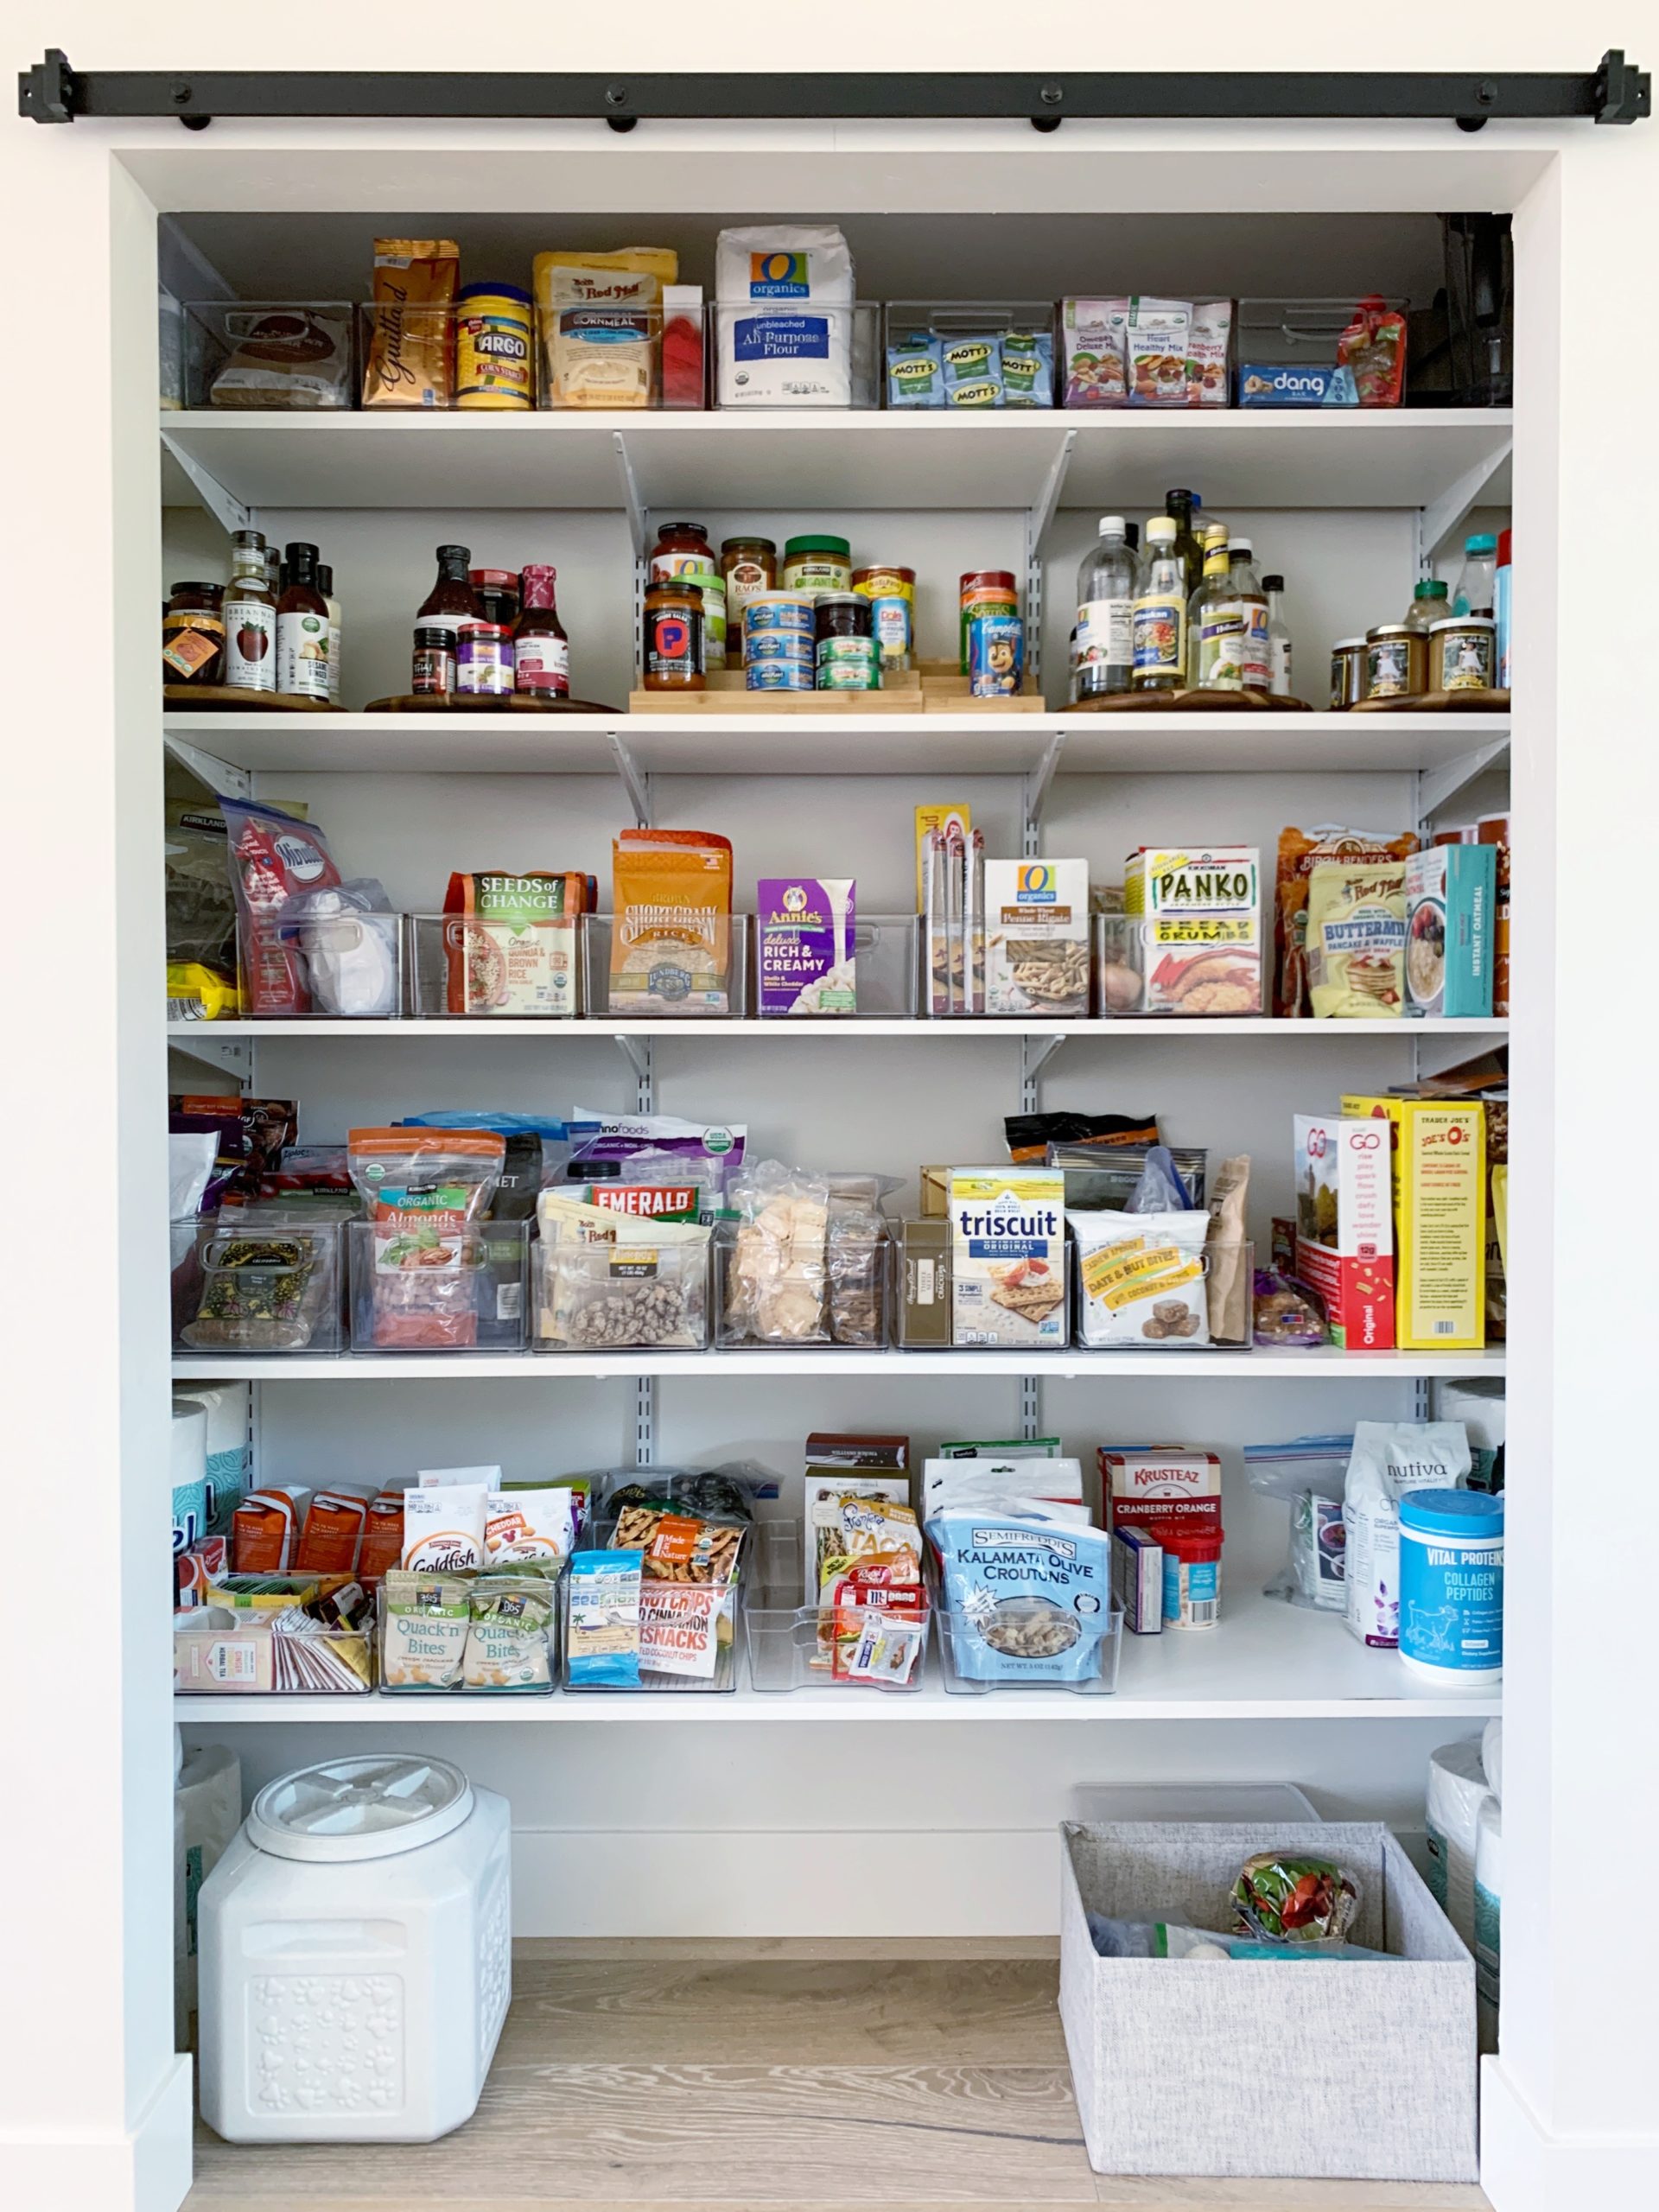 https://simplyorganized.me/wp-content/uploads/2021/05/pantry-without-doors-on-scaled.jpg